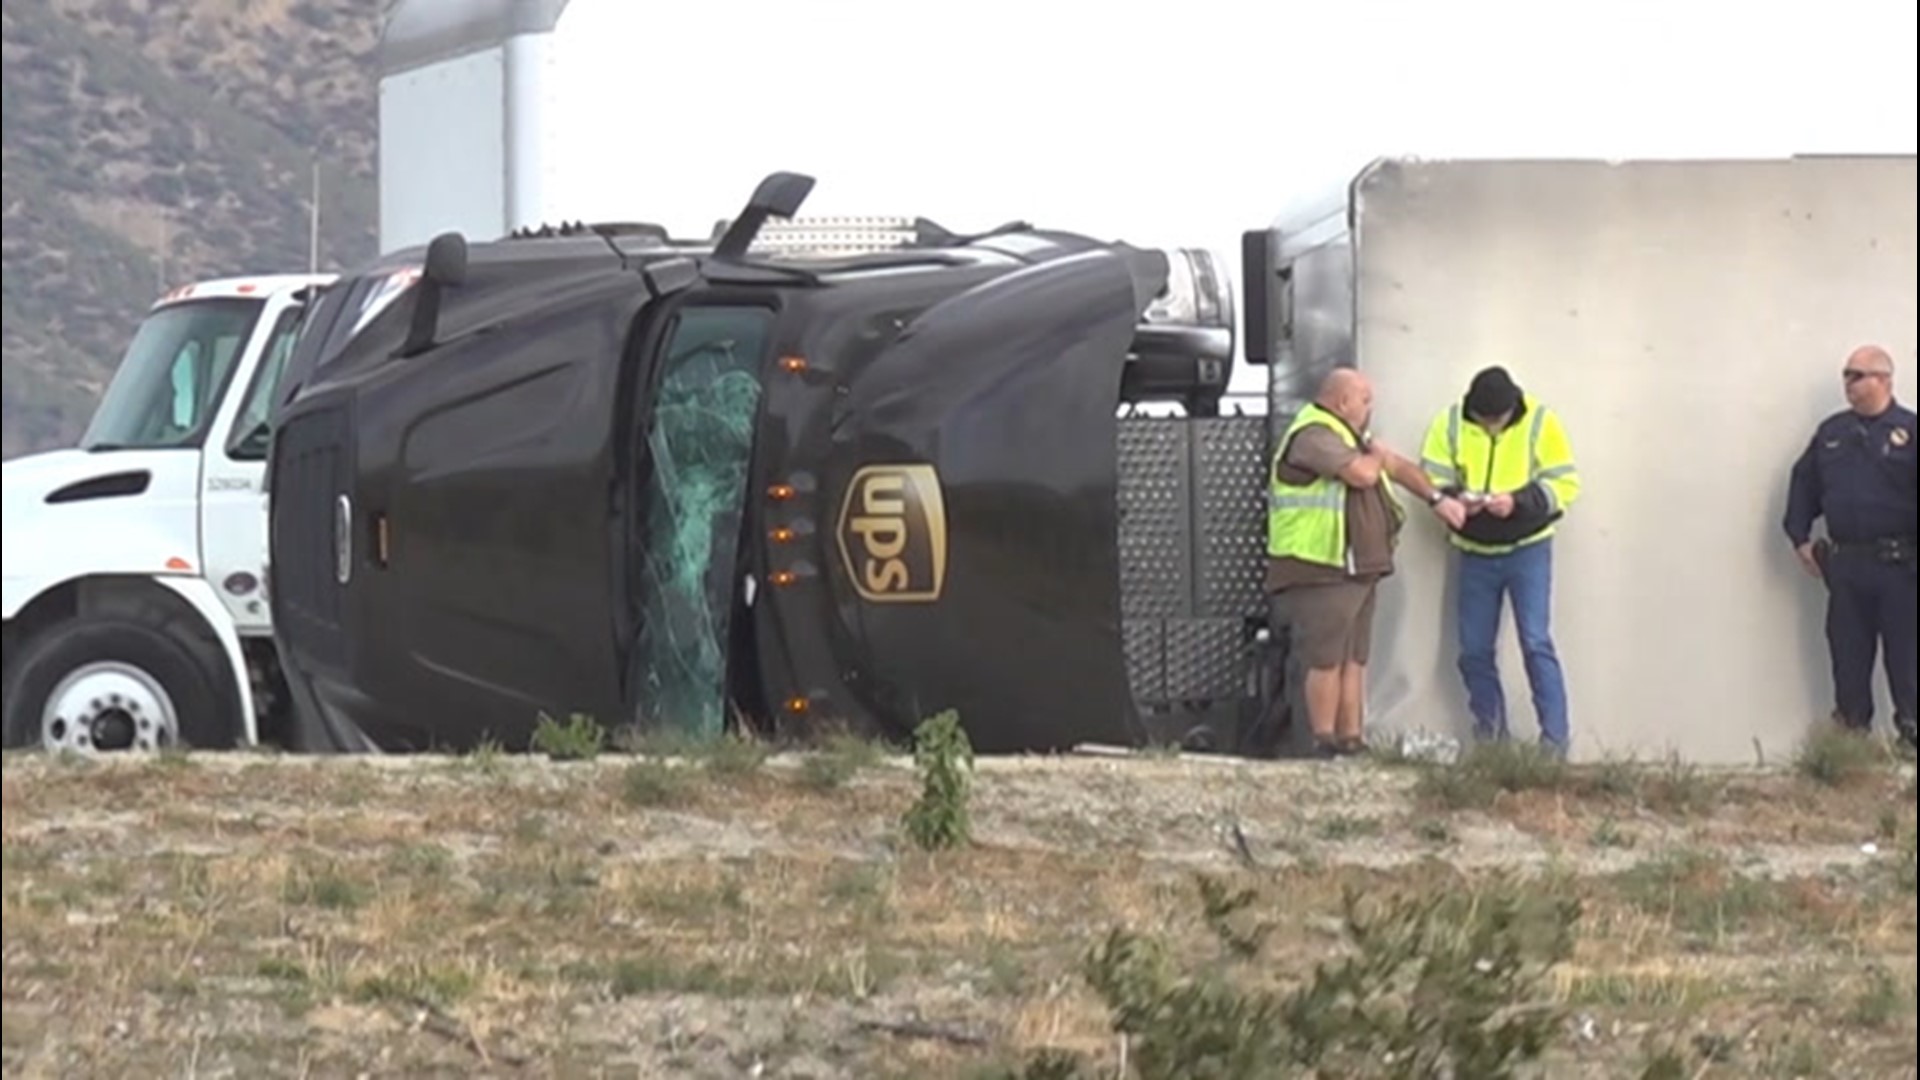 Strong winds are likely to blame for this 18-wheeler truck blown onto its side on a ramp connecting I-15 and I-210 in Fontana, California.